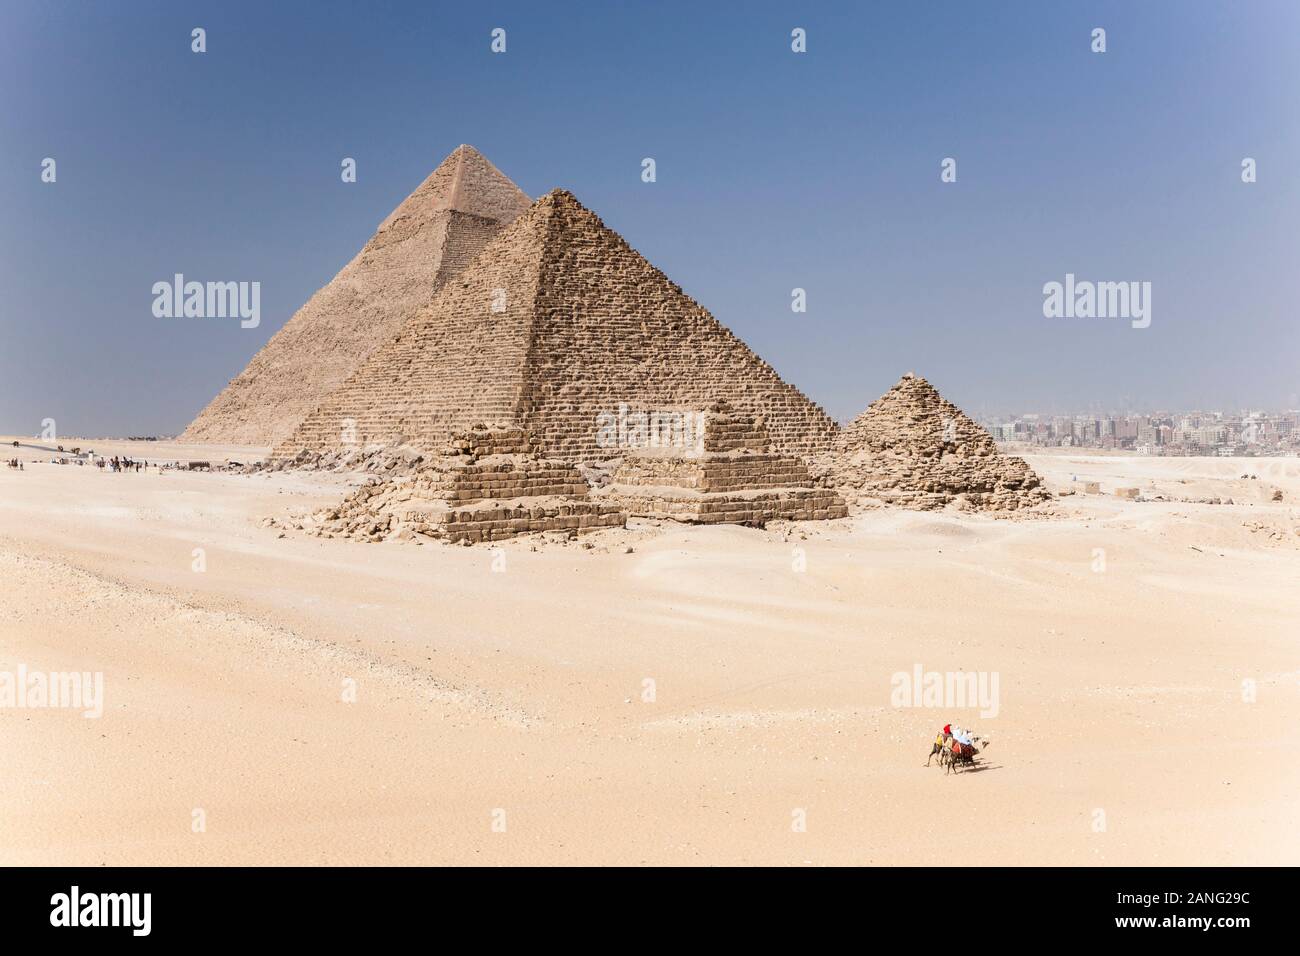 Great pyramids of Giza, the three Great pyramids, view from desert, giza, cairo, Egypt, North Africa, Africa Stock Photo